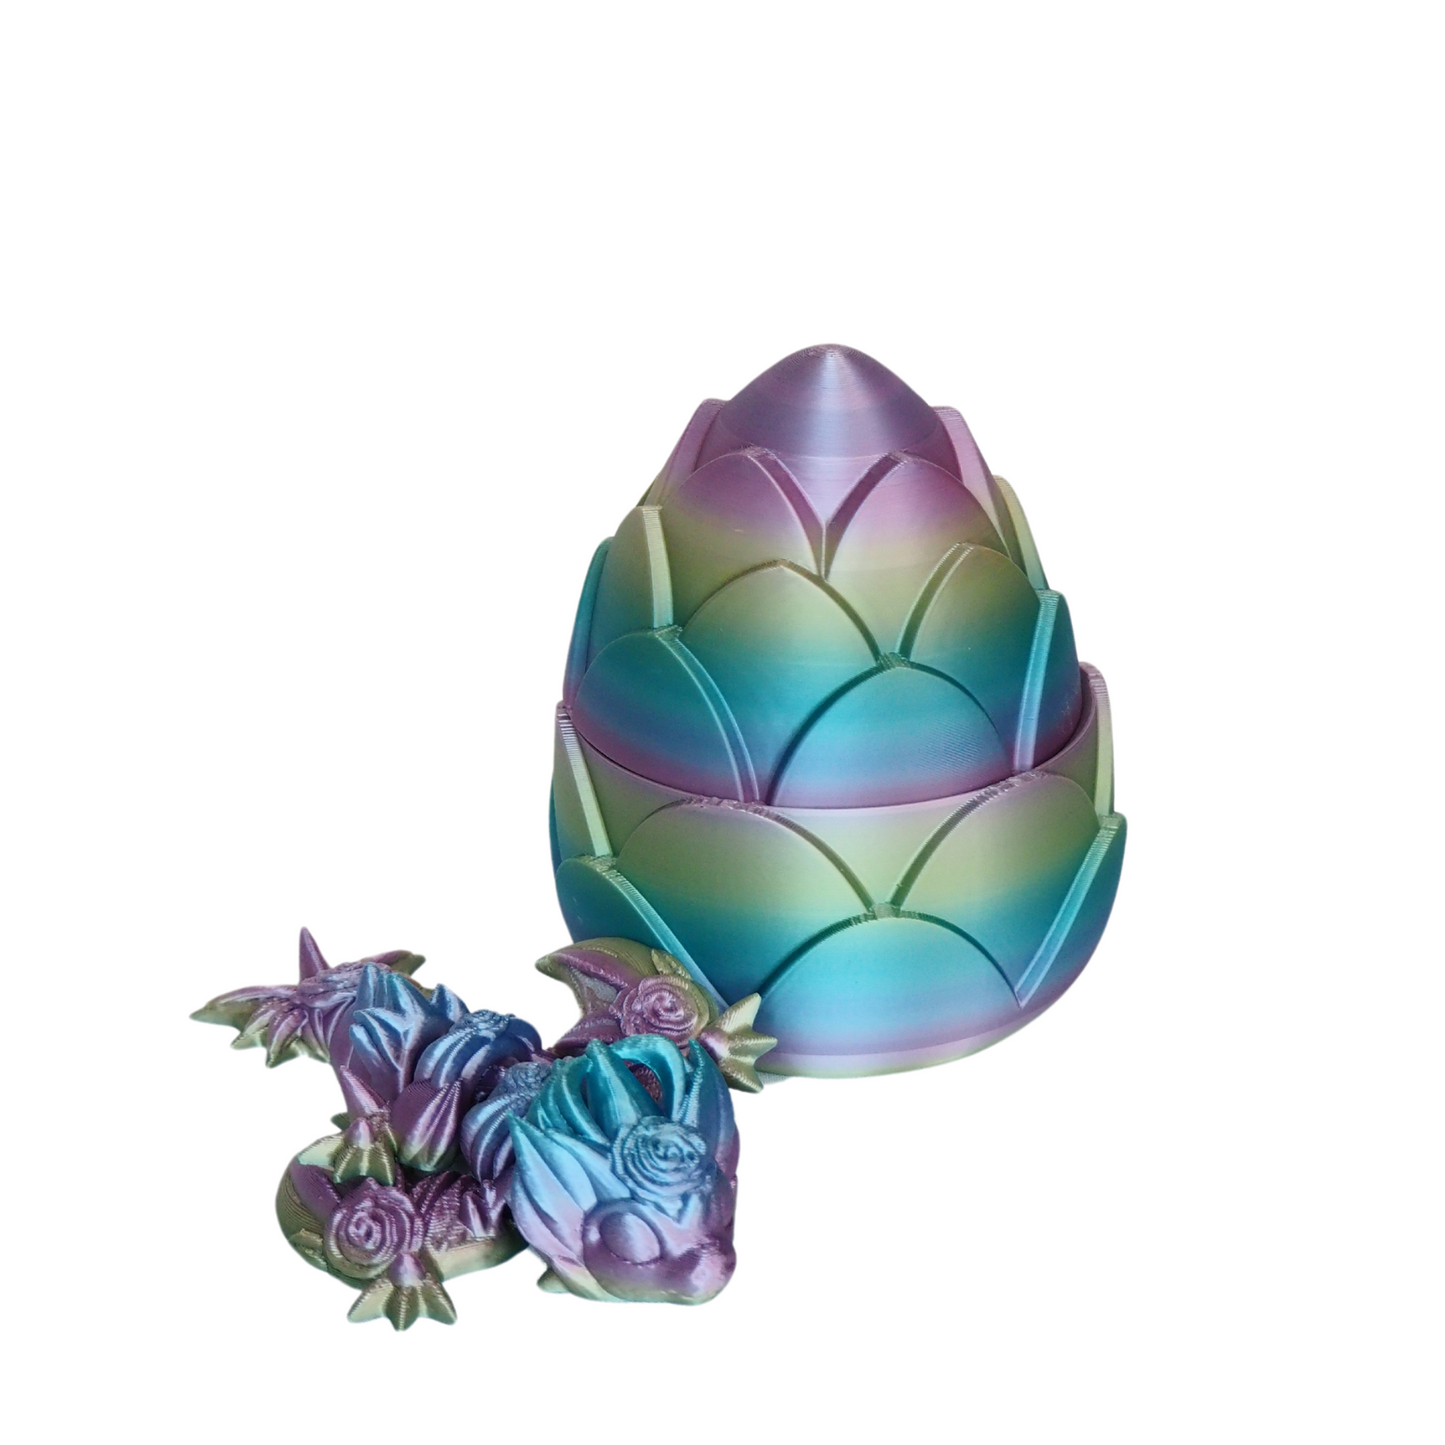 3D Printed Dragon Egg Toy, Dragon Eggs with Full Articulated Dragon Inside